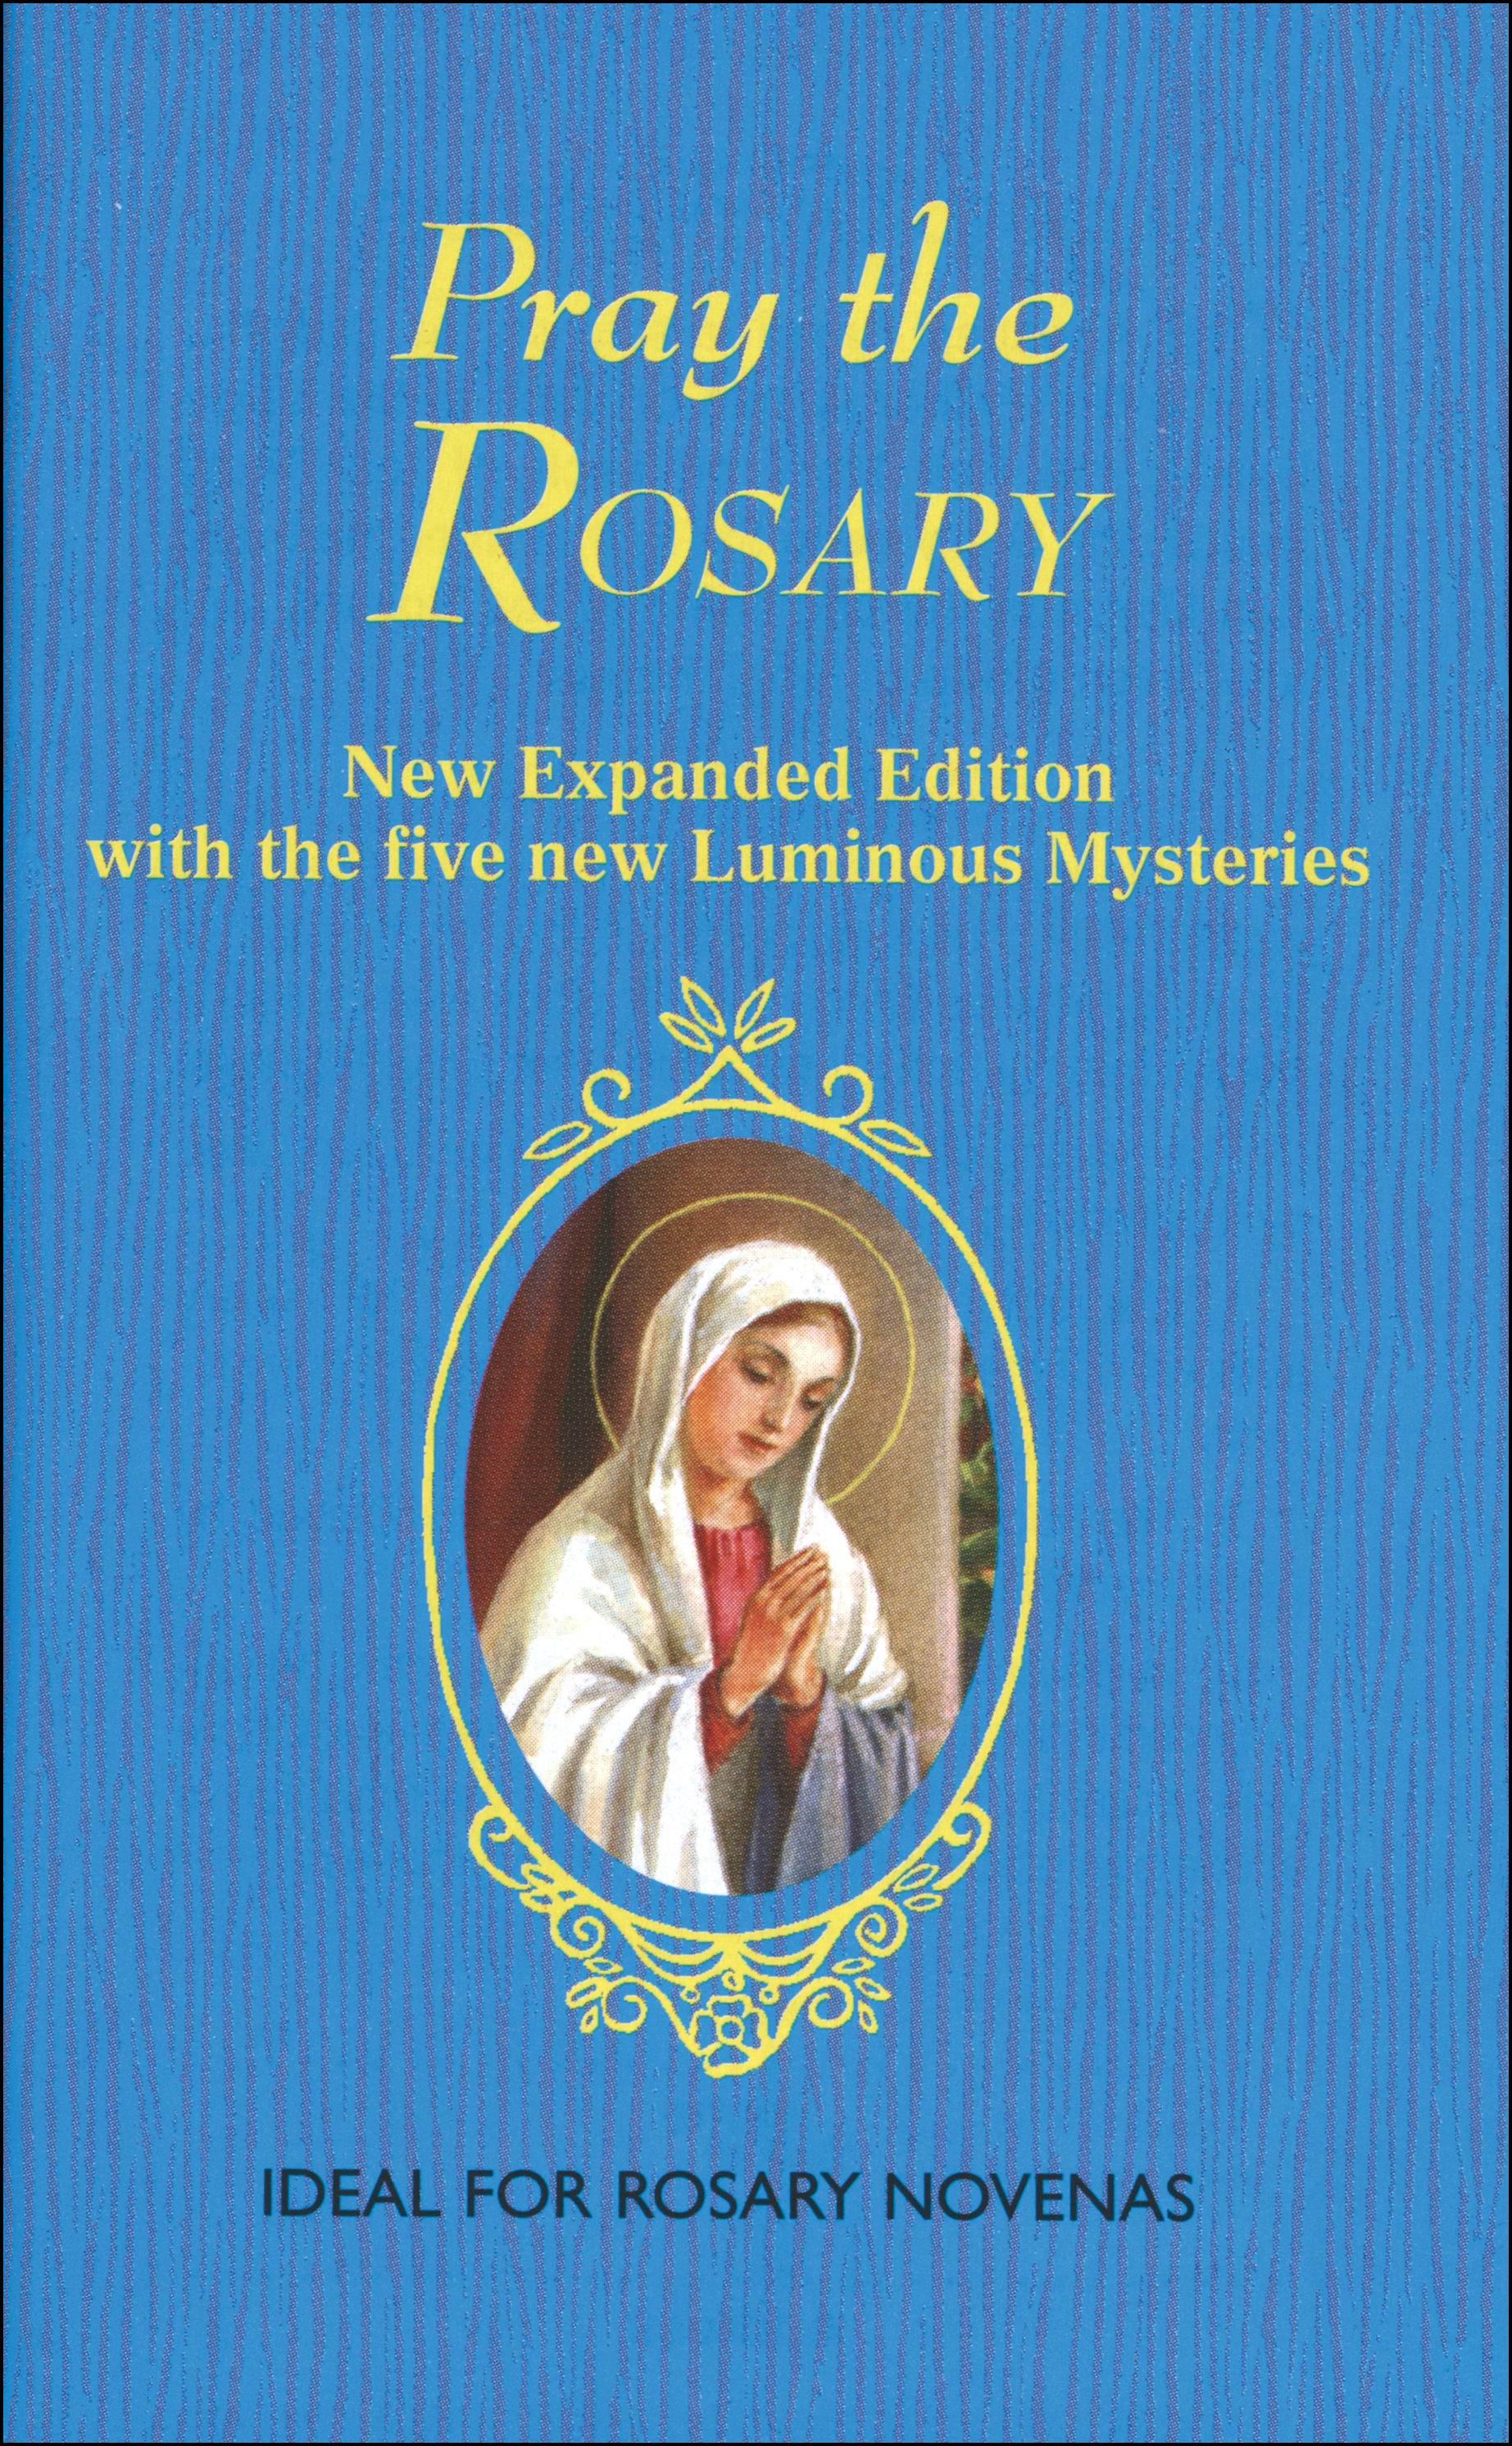 How To Pray The Rosary Printable Booklet That You Remember Us - Reverasite